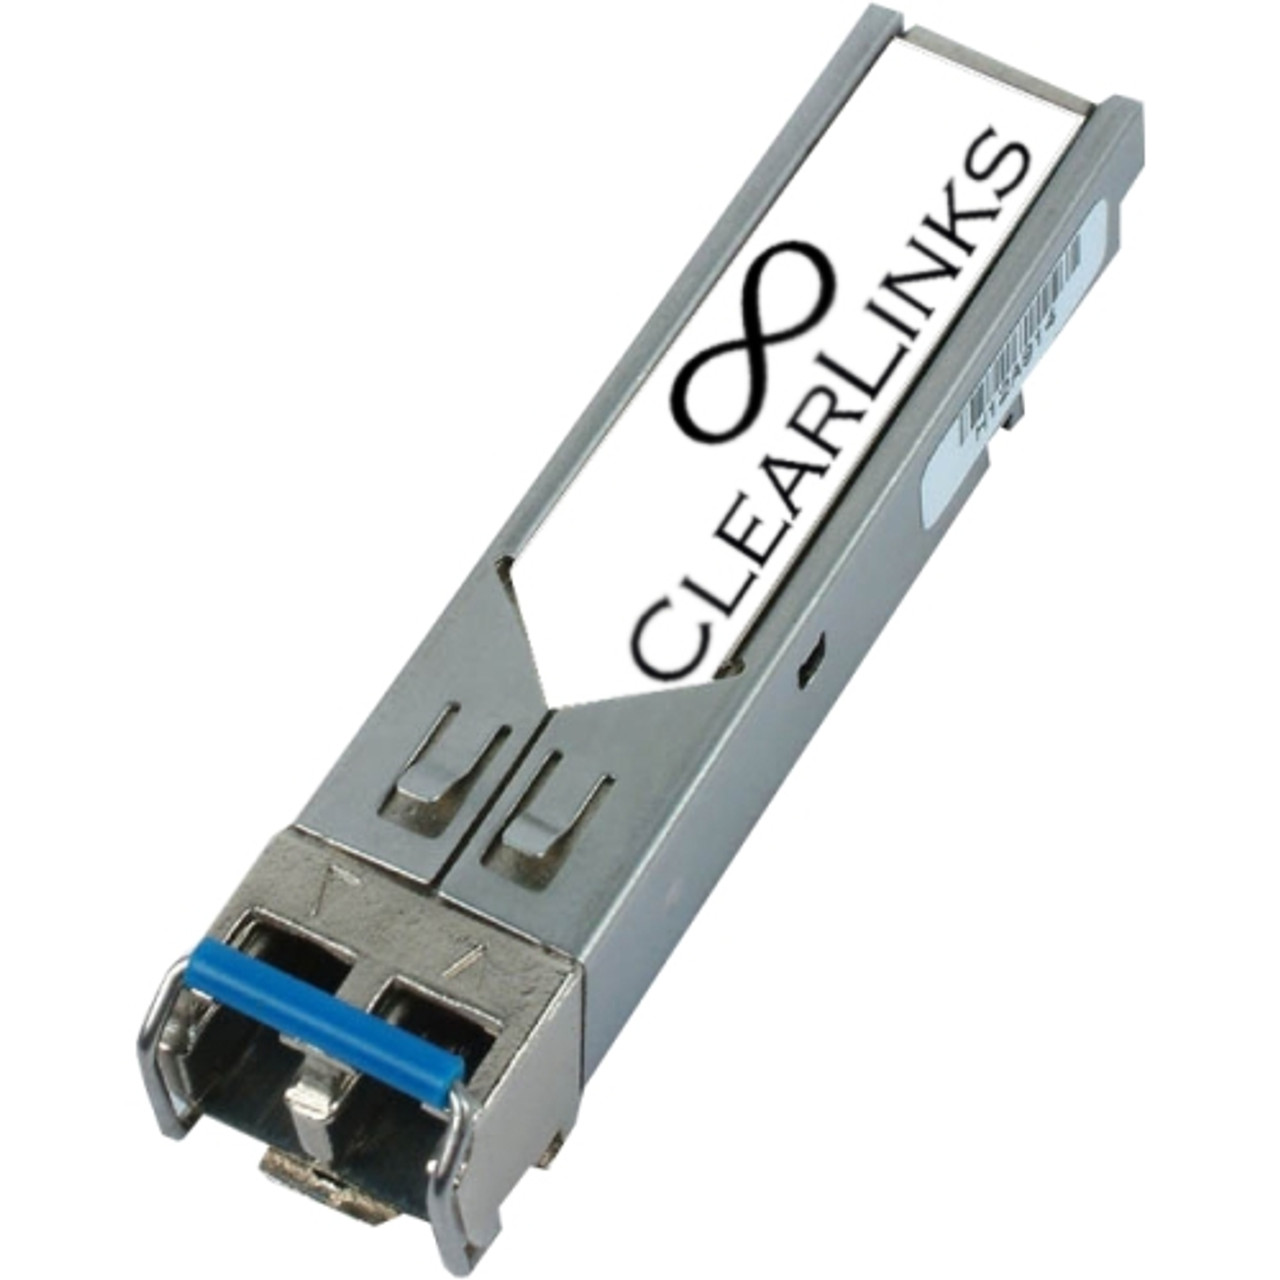 EX-SFP-1GE-LH-C ClearLinks 1Gbps 1000Base-ZX Single-mode Fiber 80km 1550nm Duplex LC Connector SFP Transceiver Module with DOM for Dell Compatible